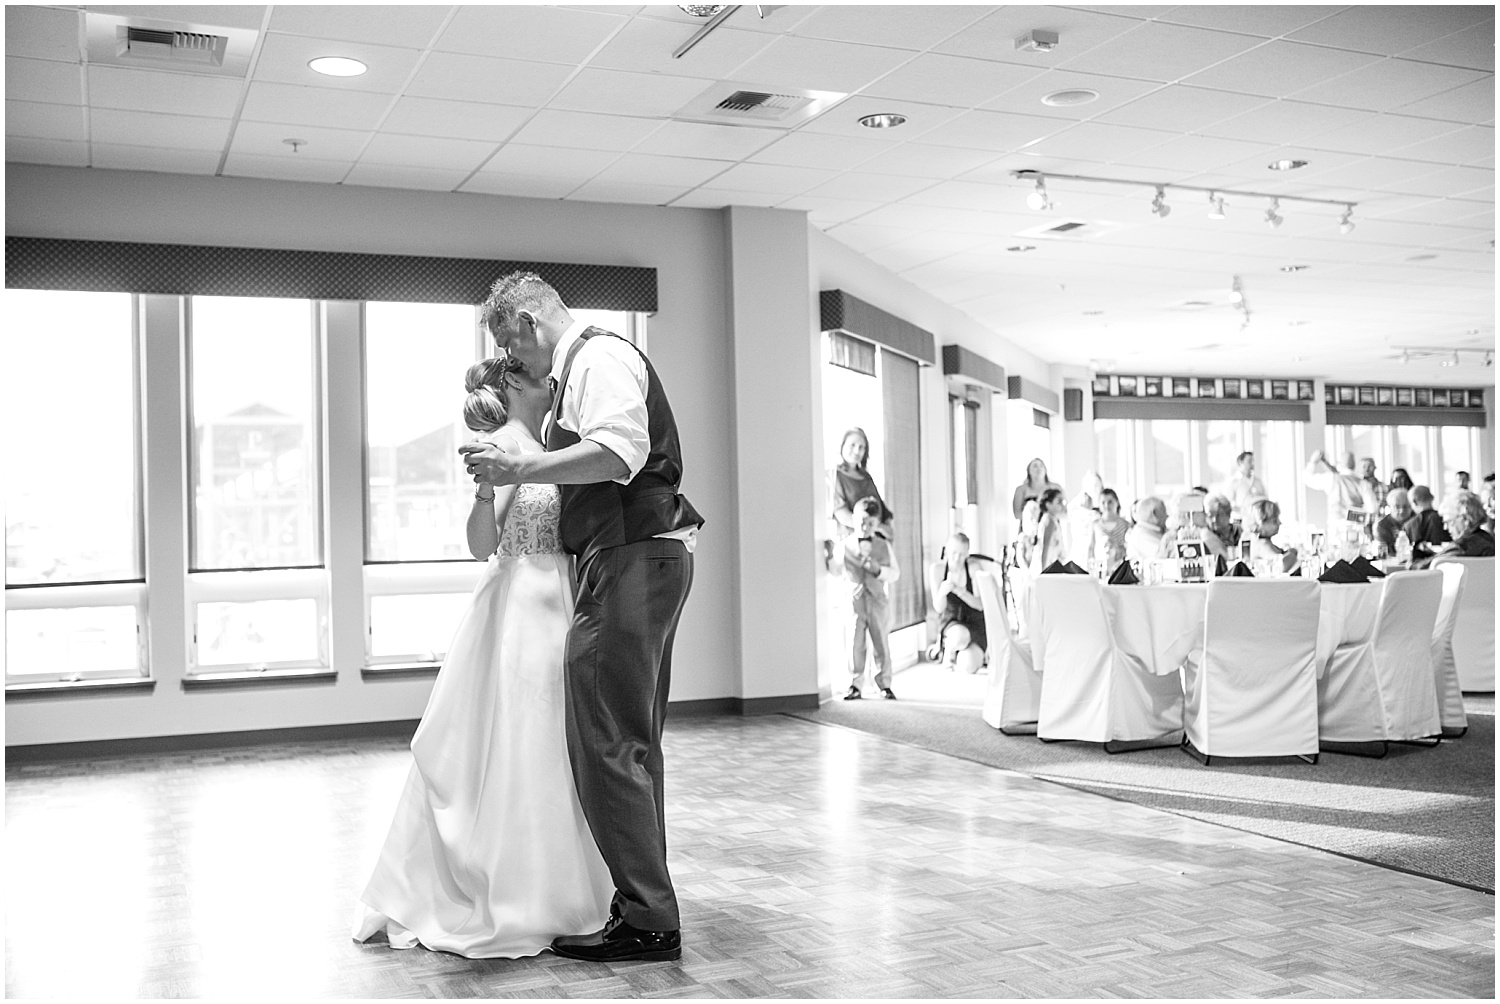 Bride and groom's first dance at Edmonds Yacht Club wedding